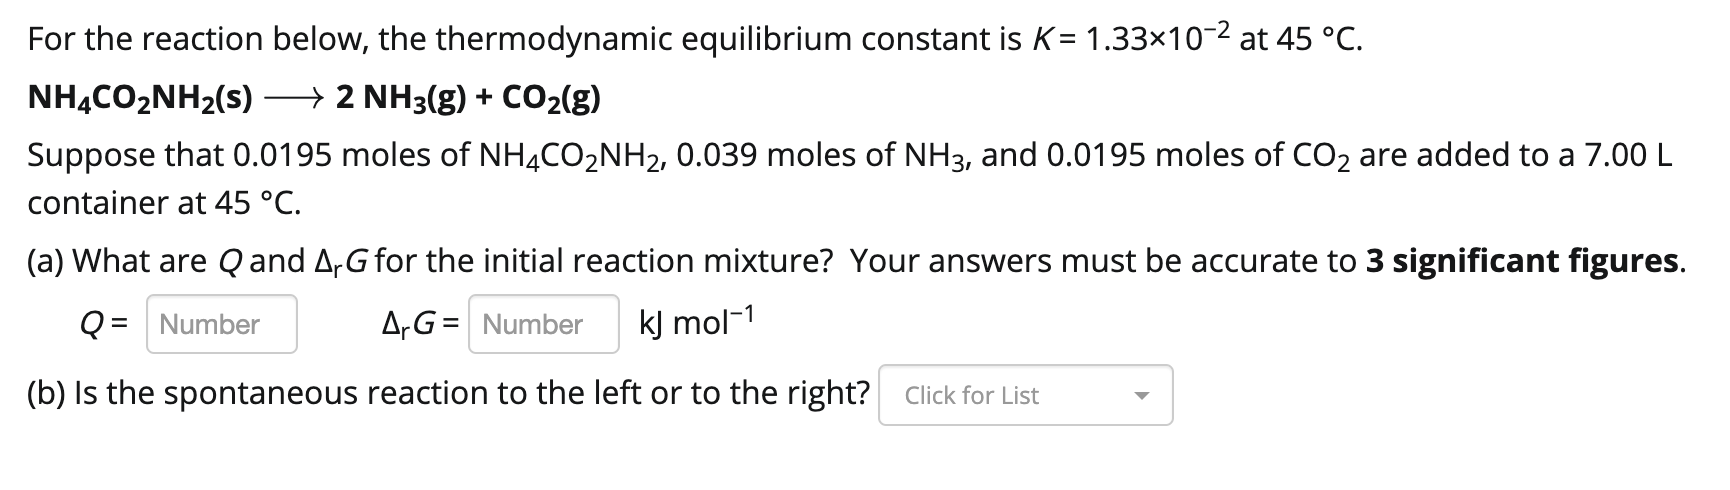 For the reaction below, the thermodynamic equilibrium constant is K = 1.33x10-2 at 45 ?C. NH4CO2NH2(s) + 2 NH3(g) + CO2(g) Su